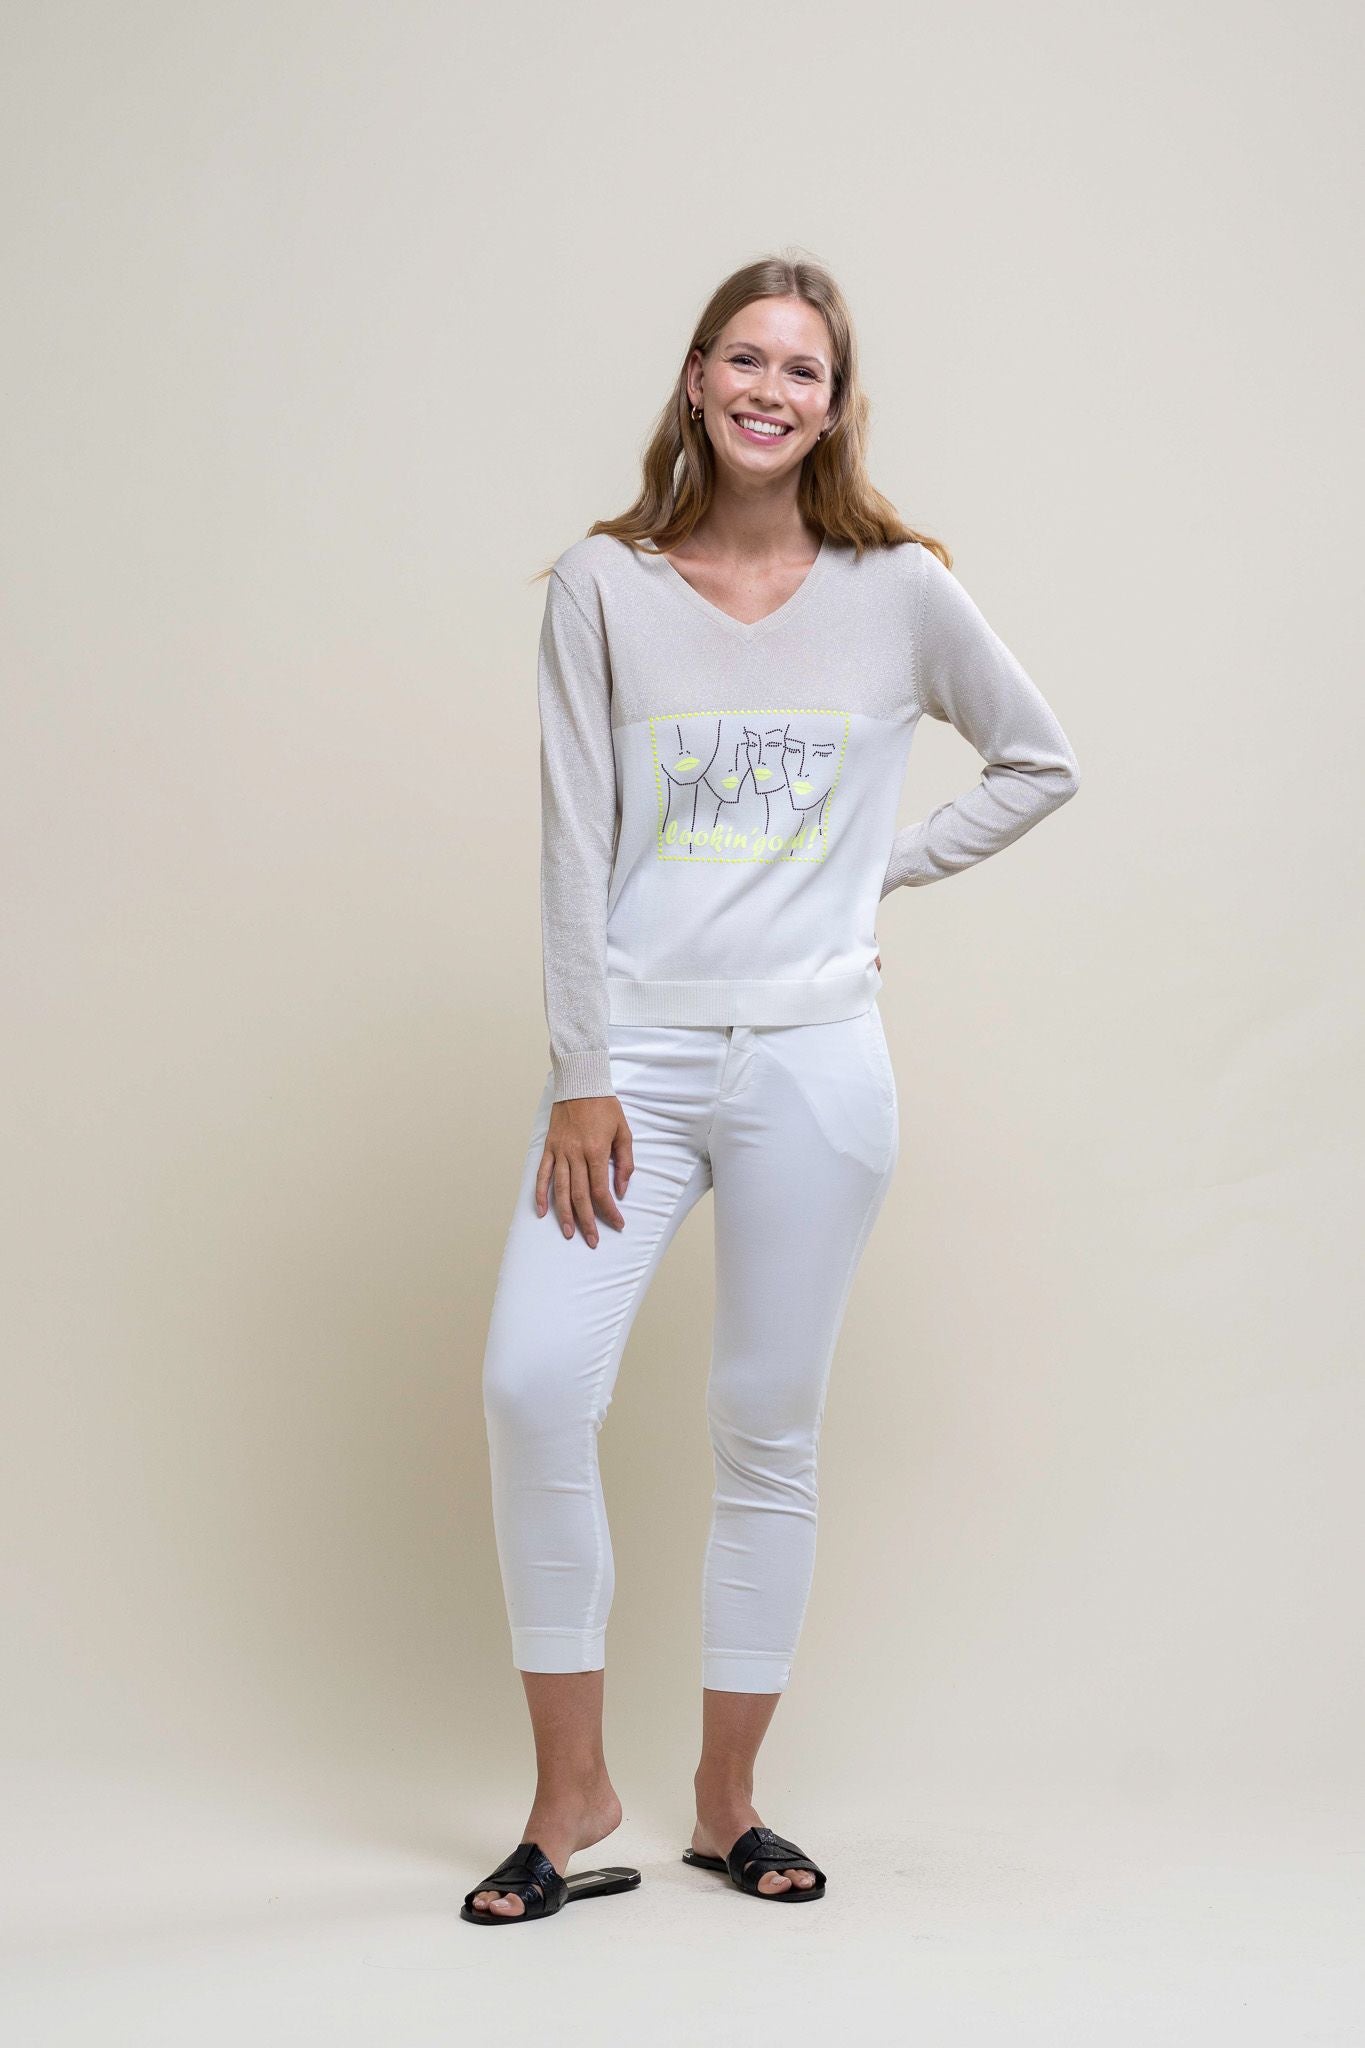 'Looking Good' Face Print Jumper With Gold Shimmer Detail